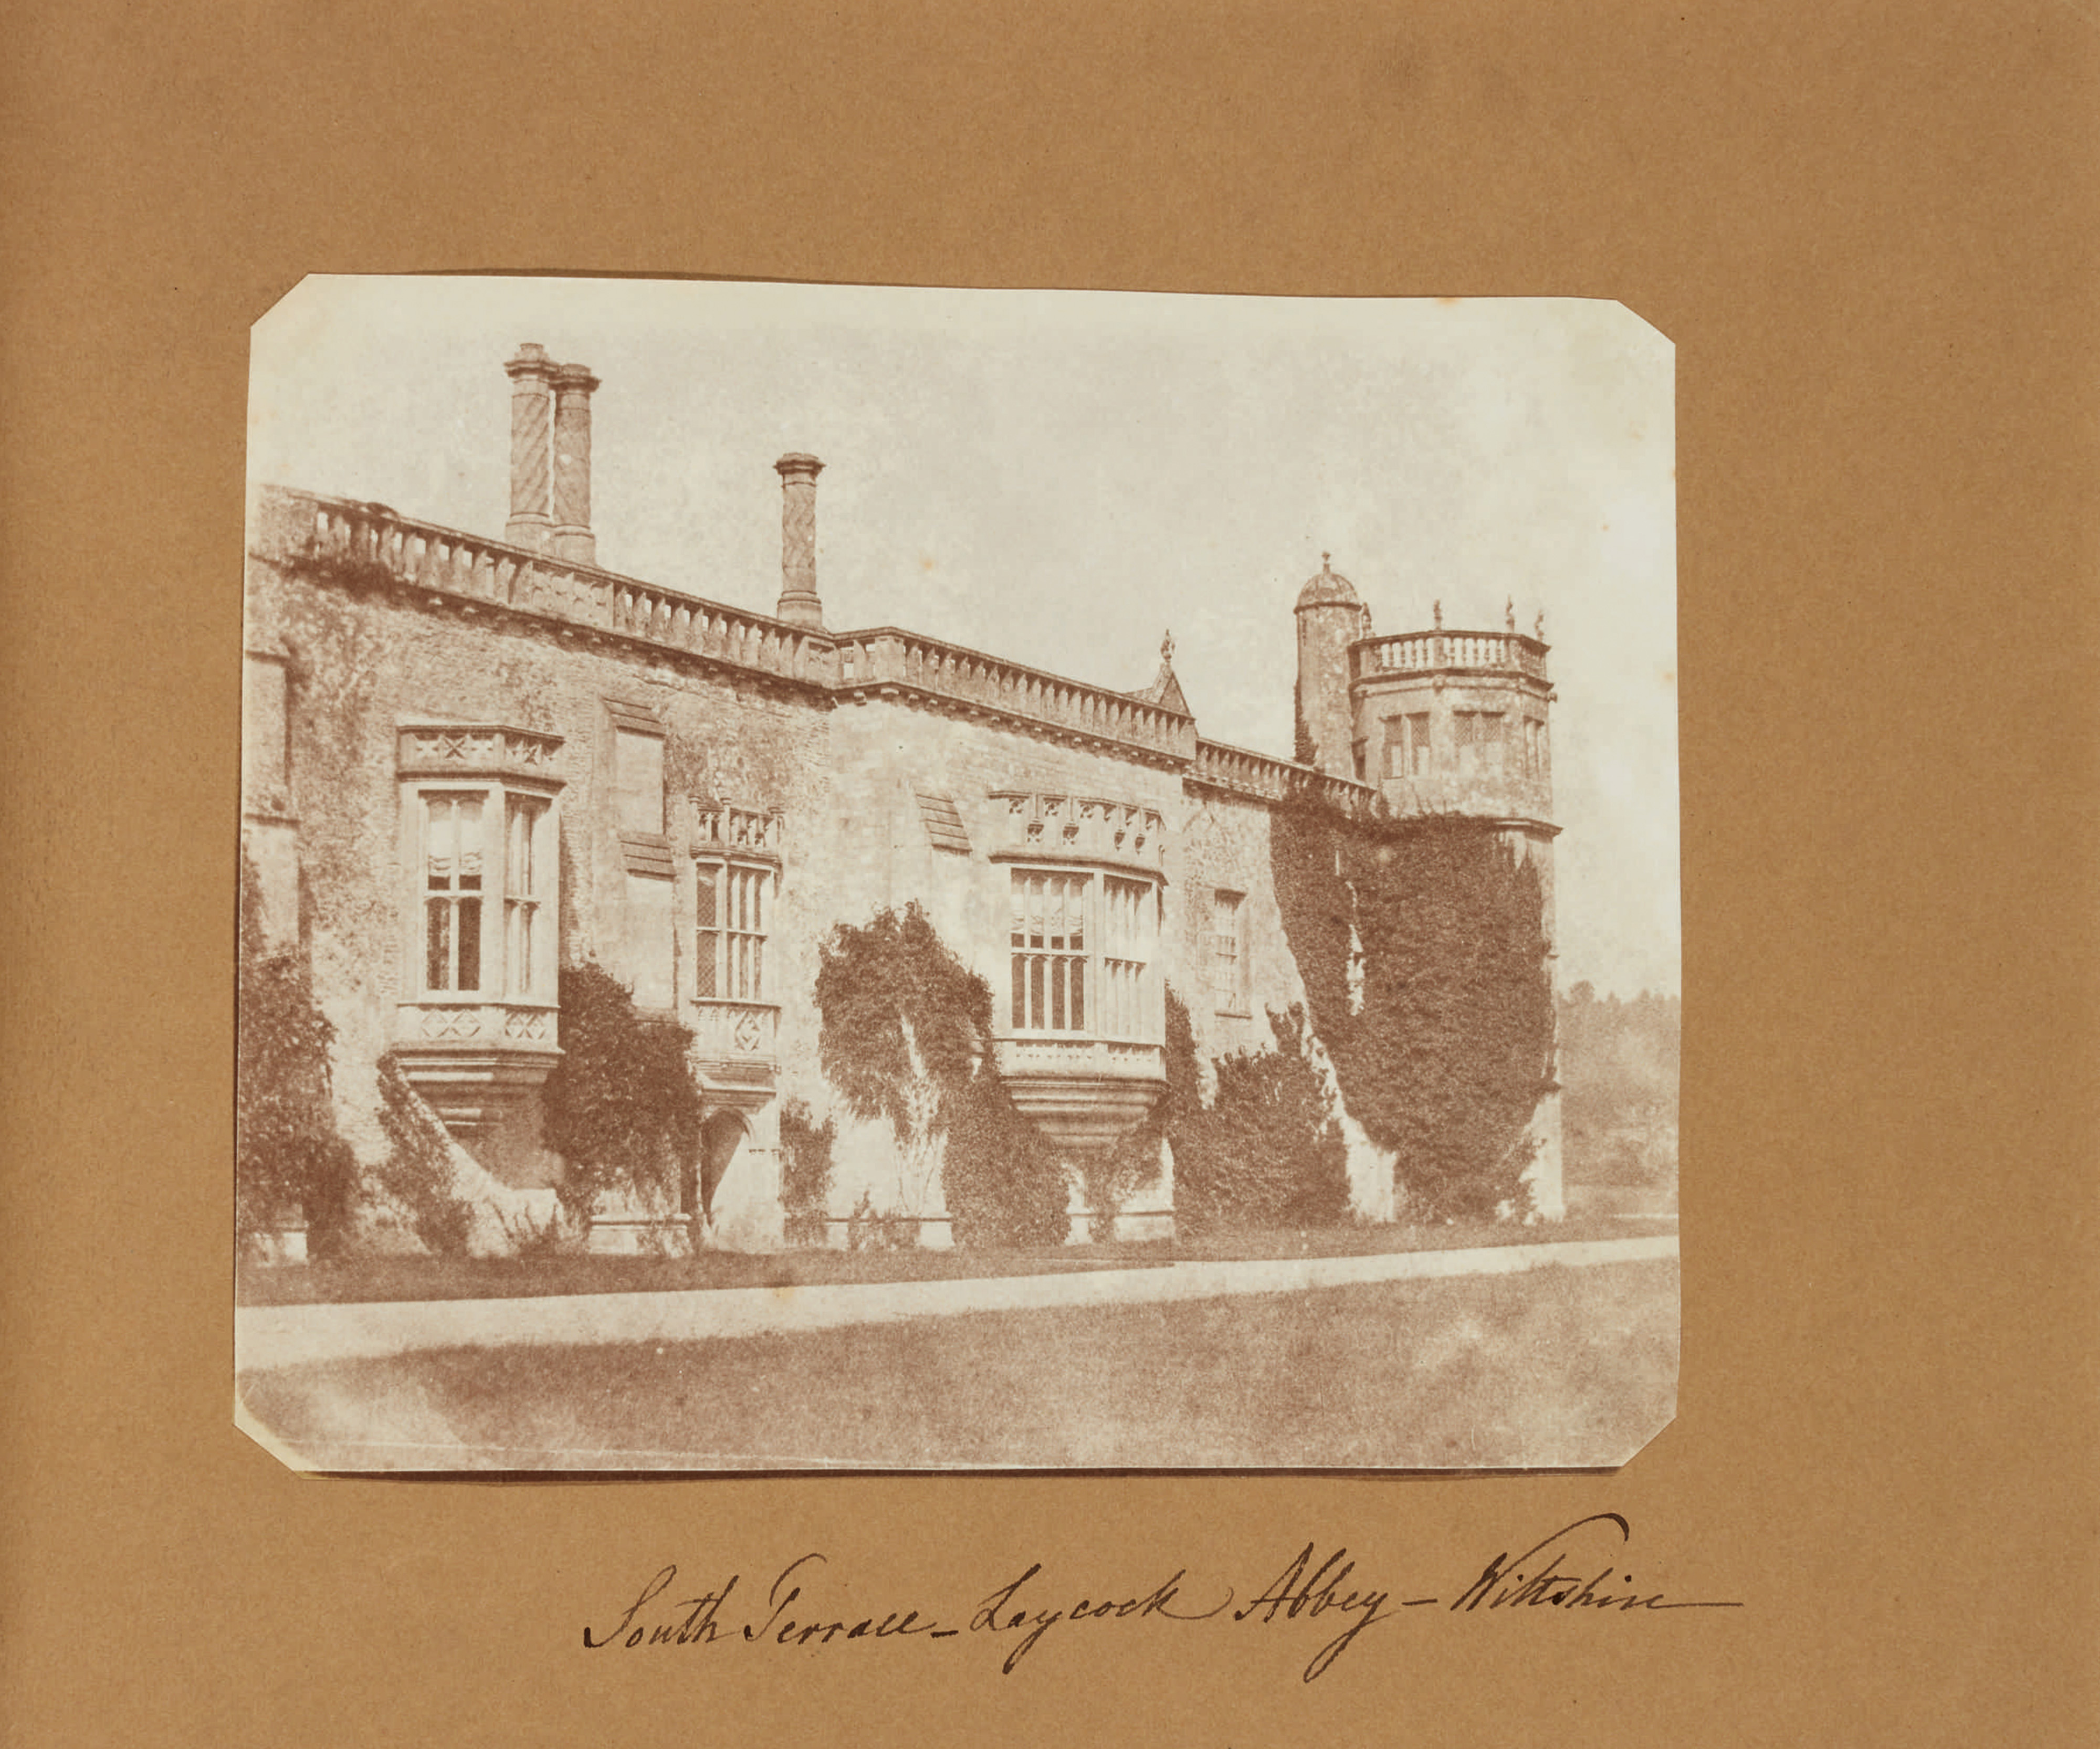 Sotheby's Will Auction a Hoard of the World's Earliest Photographs, Taken by 19th-Century Inventor Henry Fox Talbot—See Images Here